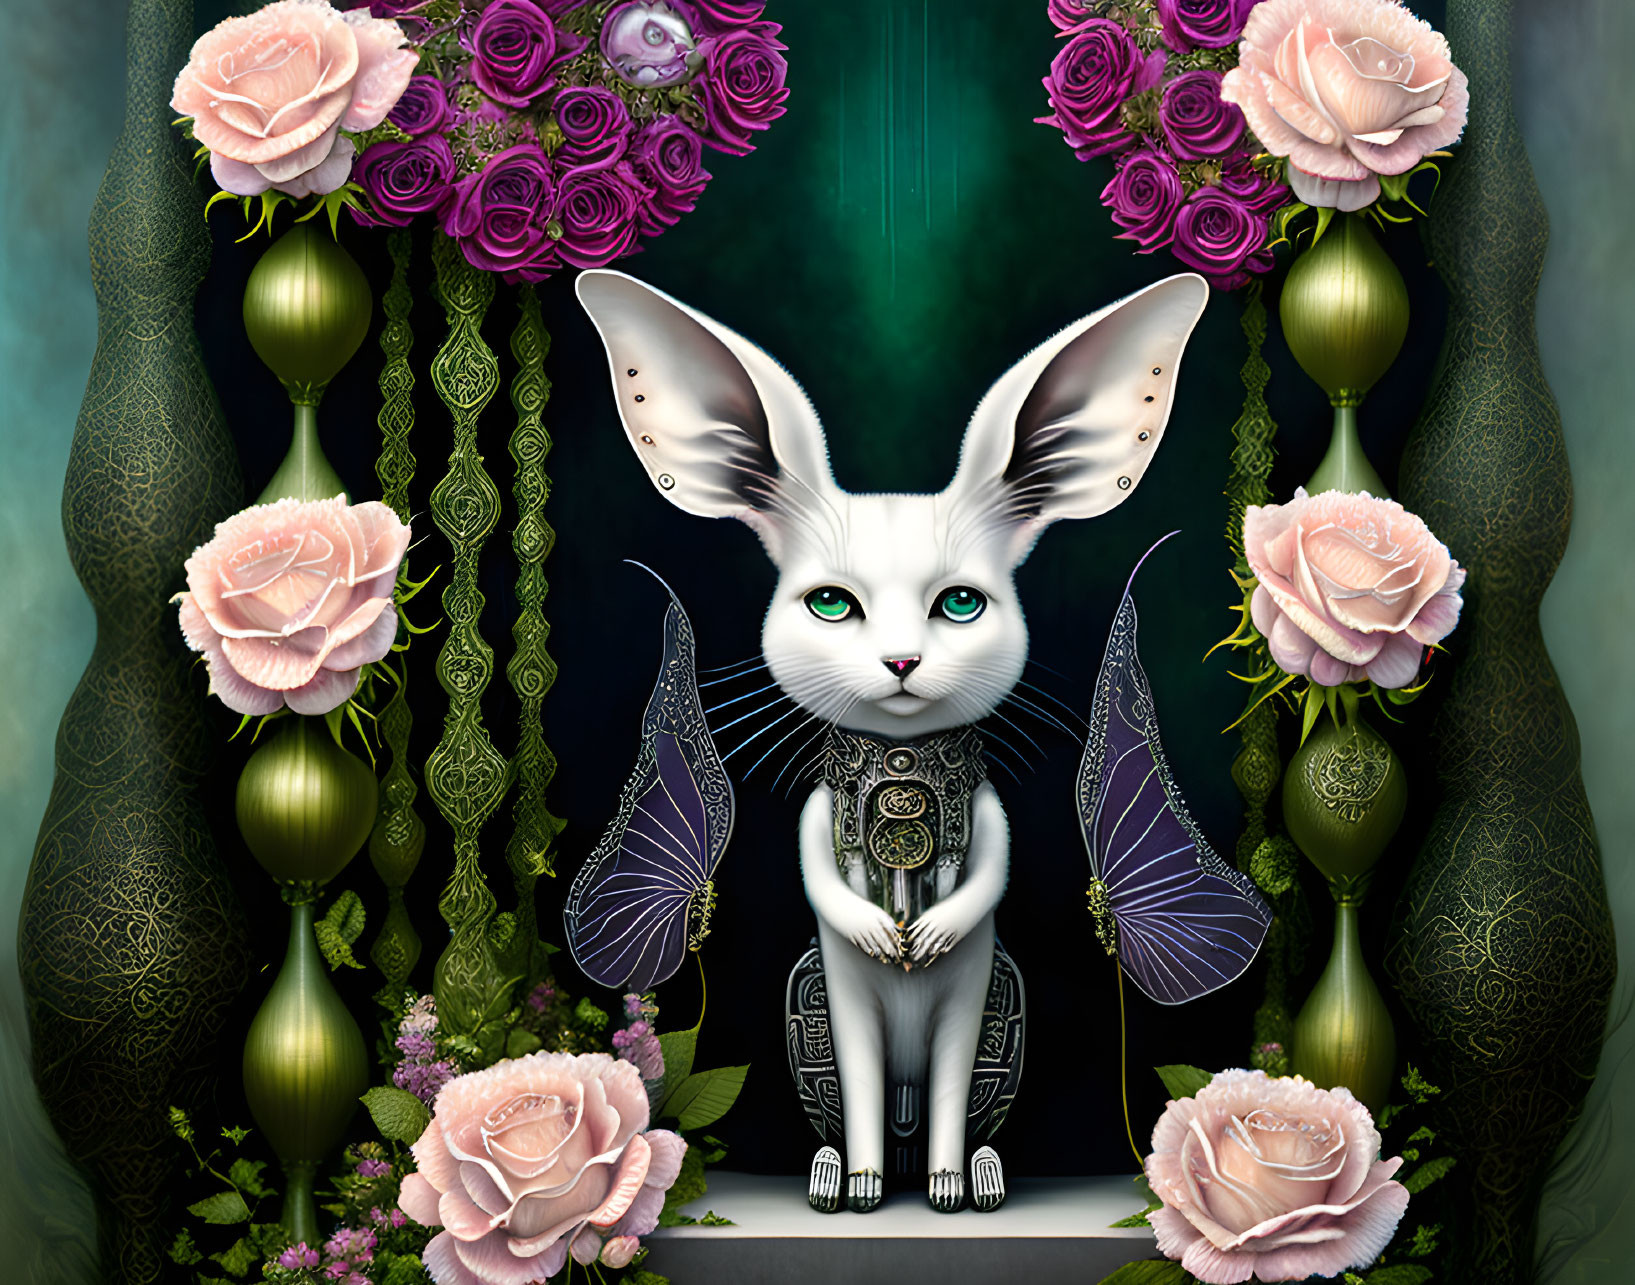 Anthropomorphic white cat surrounded by roses and gold ornamentation